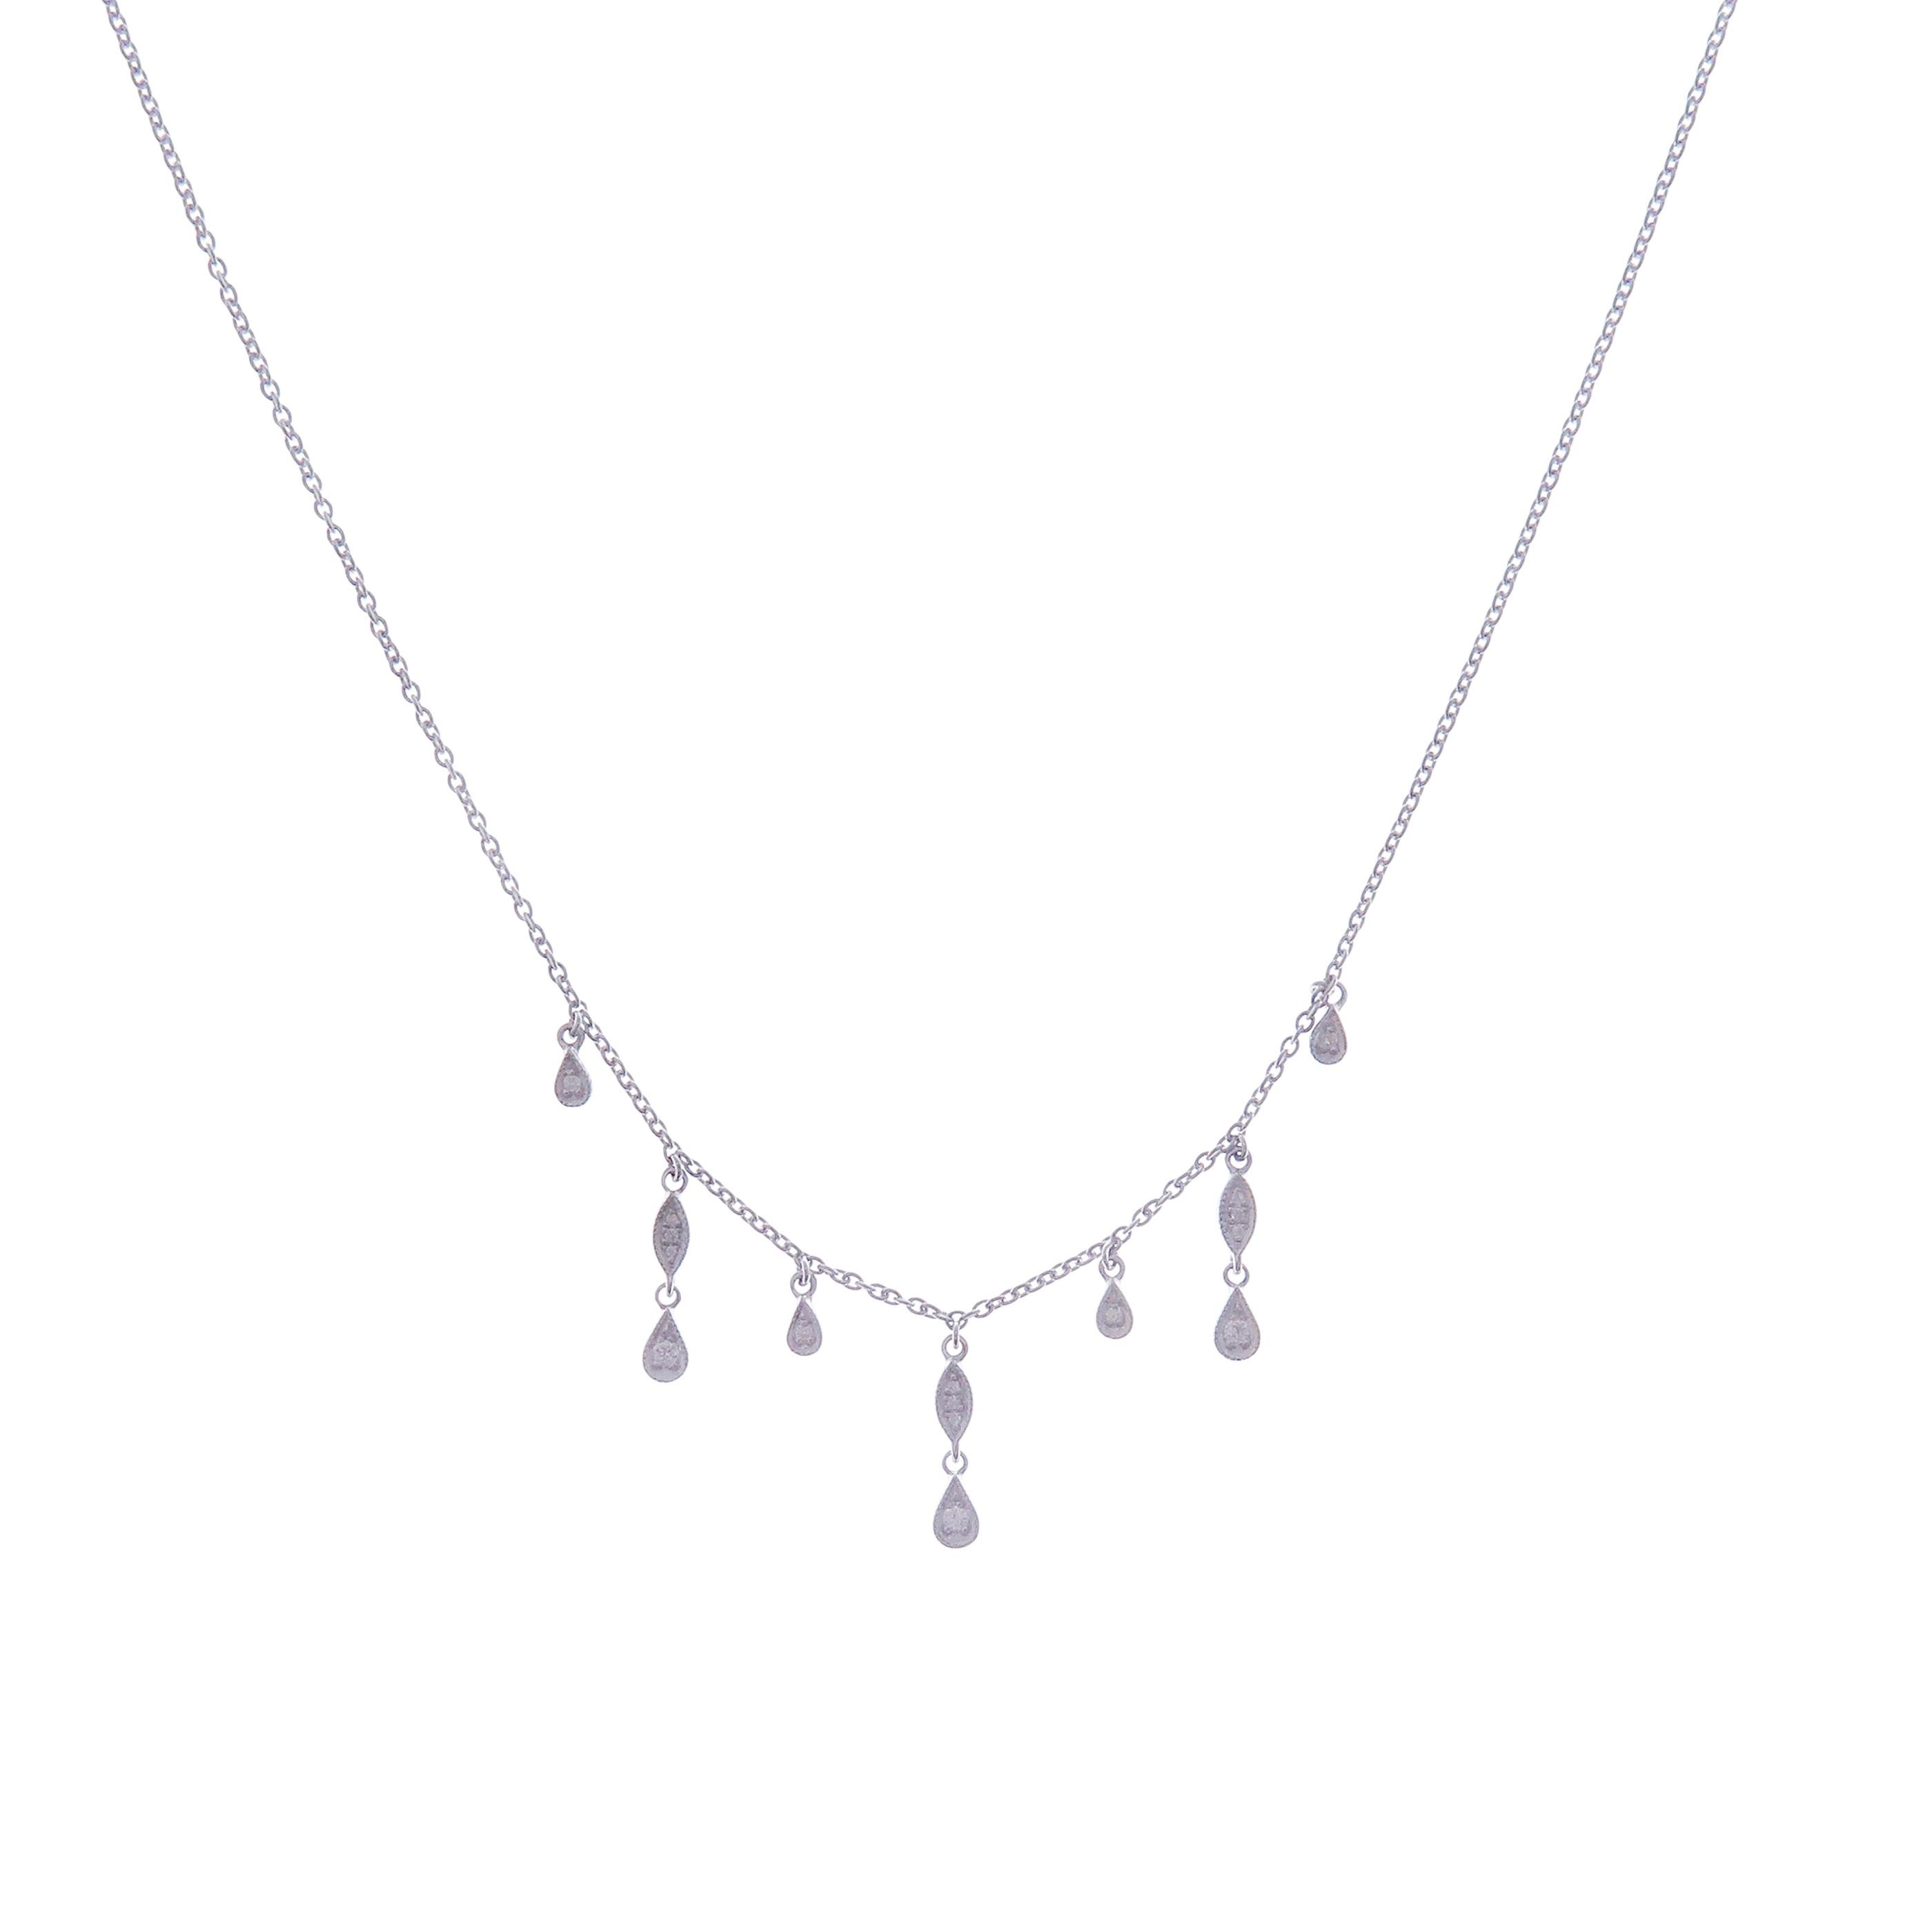 This delicate necklace is crafted in 18-karat white gold, weighing approximately 0.10 total carats of SI-H Quality white diamonds. 

Necklace is 16